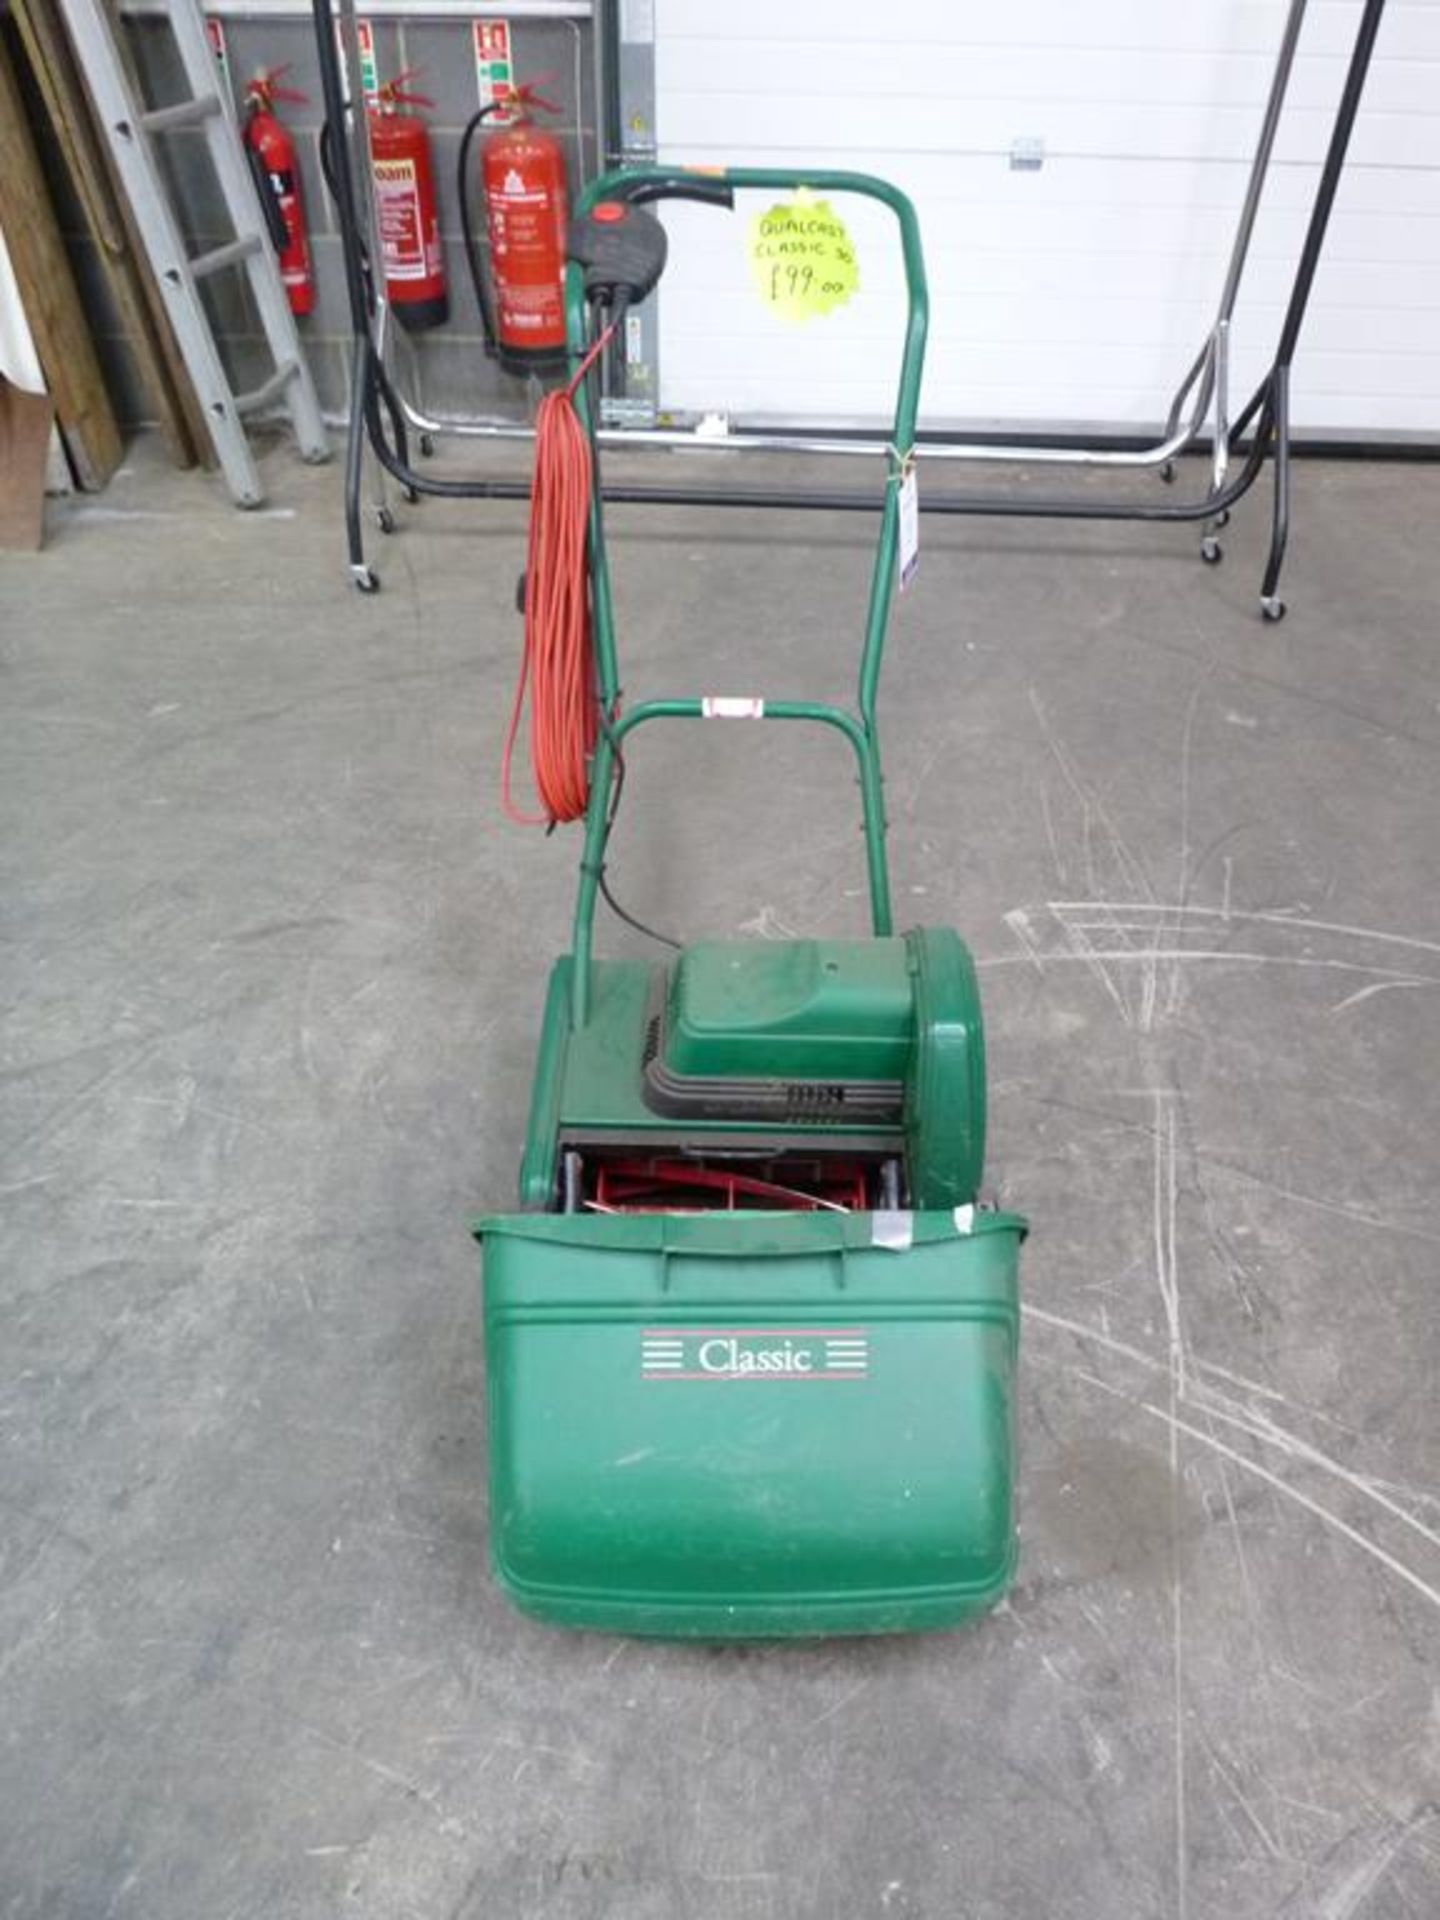 A Reconditioned Qualcast Classic 30 Electric Lawnmower with Lawnrake Cassette. Shop Price £99 - Image 3 of 3